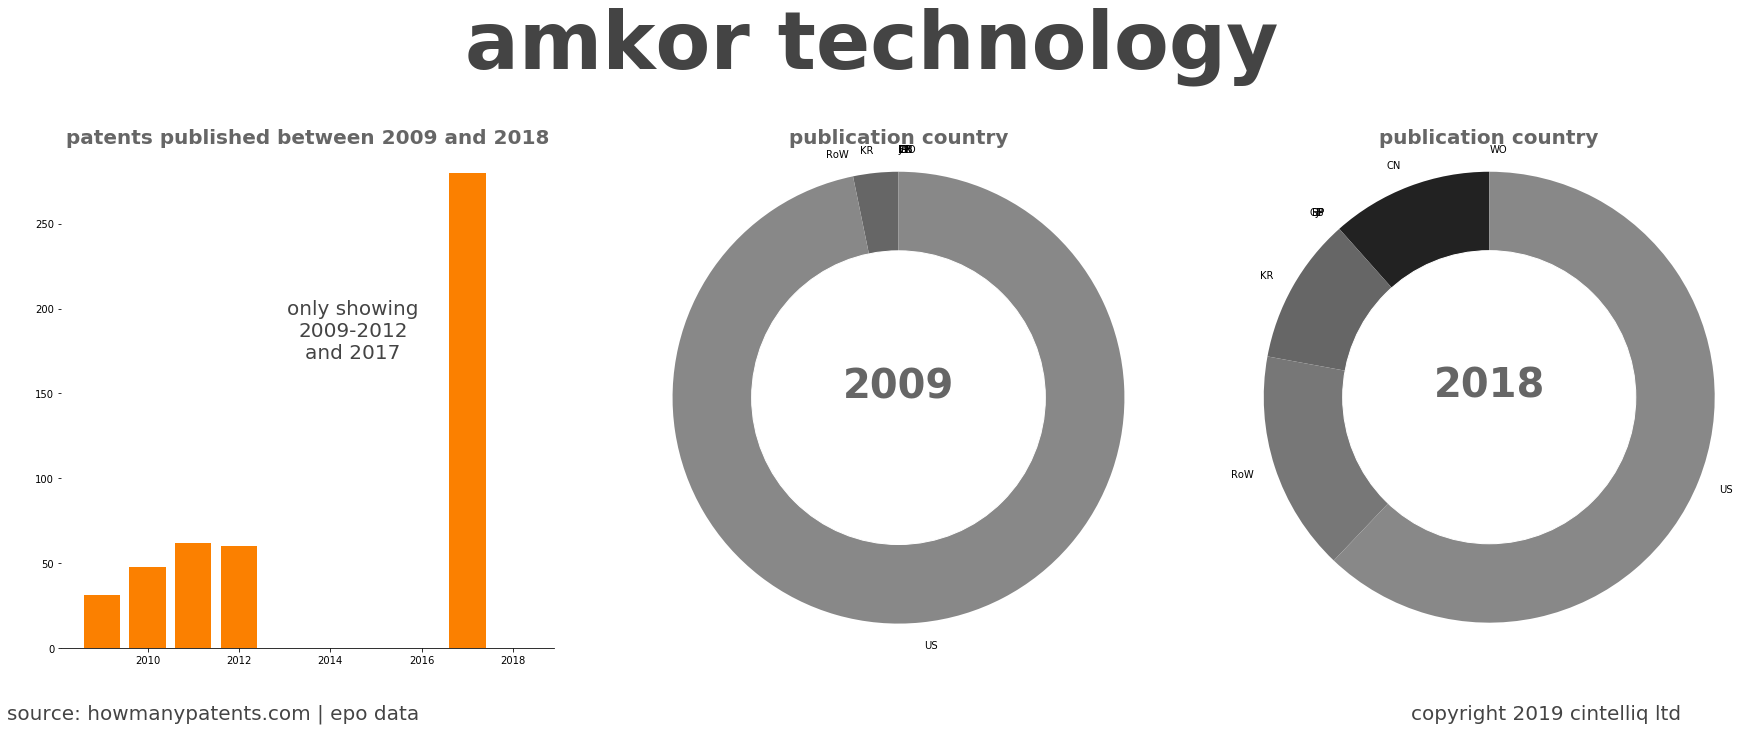 summary of patents for Amkor Technology